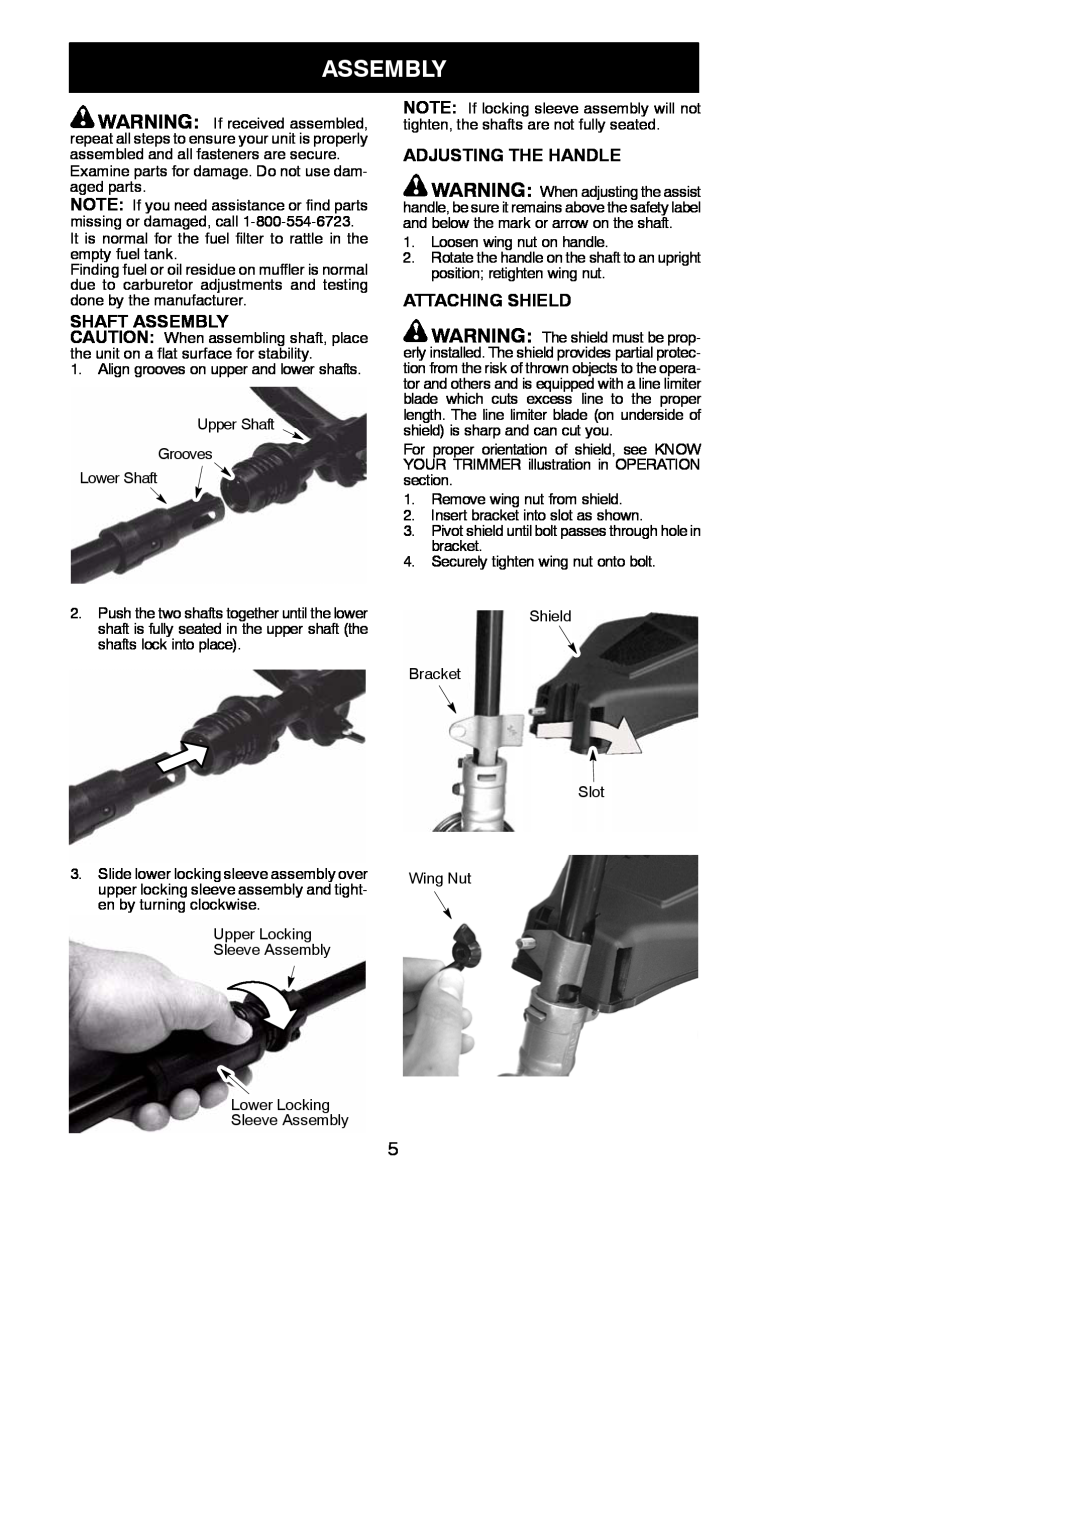 Weed Eater 545186794, FL20C instruction manual Shaft Assembly, Adjusting The Handle, Attaching Shield 